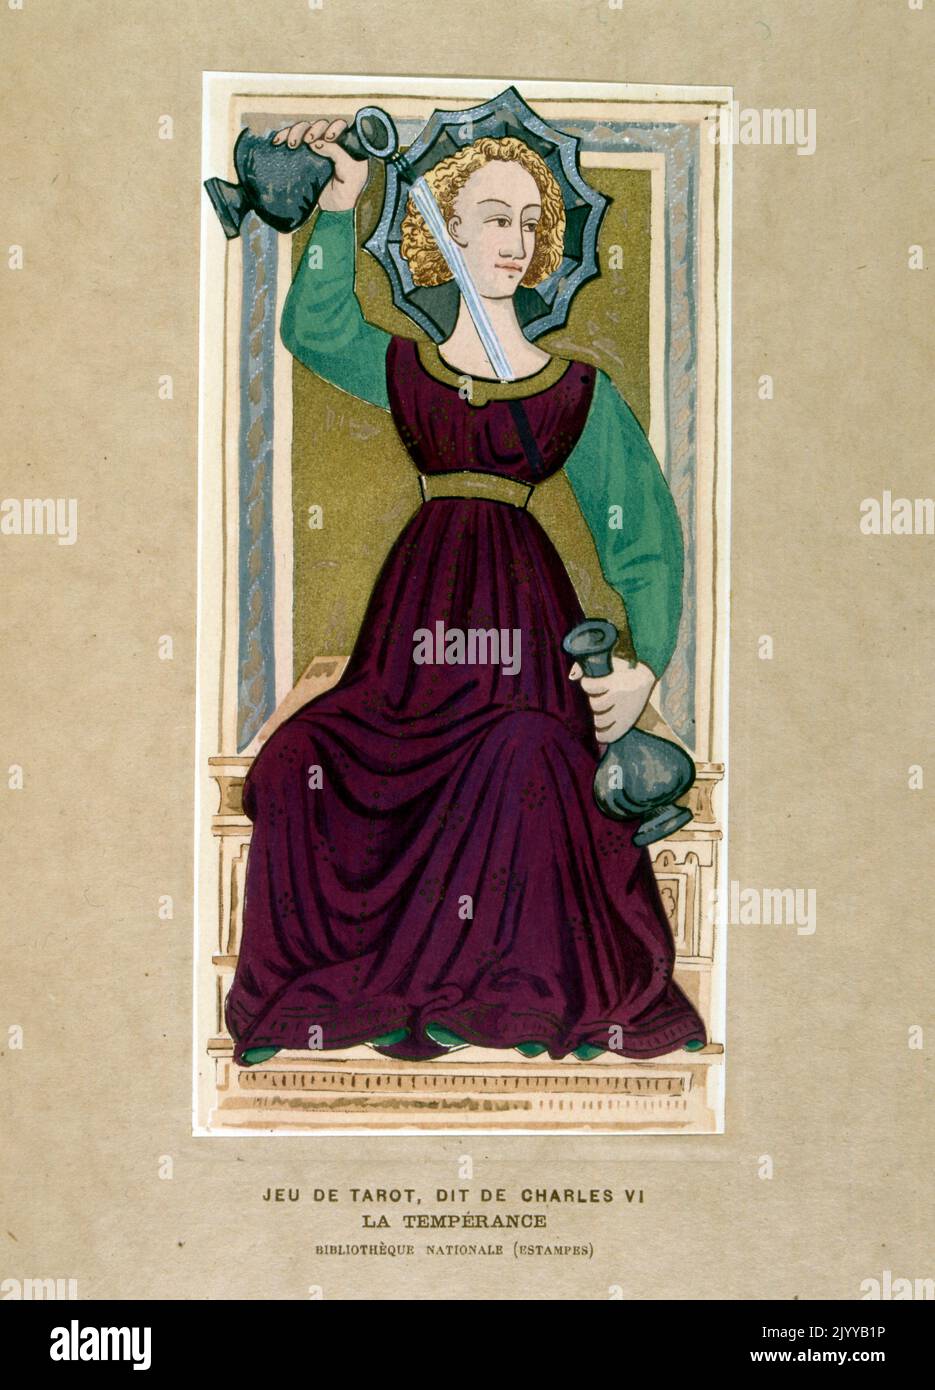 Coloured Illustration of a card from a tarot set said to belong to Charles VI of a young woman representing justice holding scales and a sword. Stock Photo